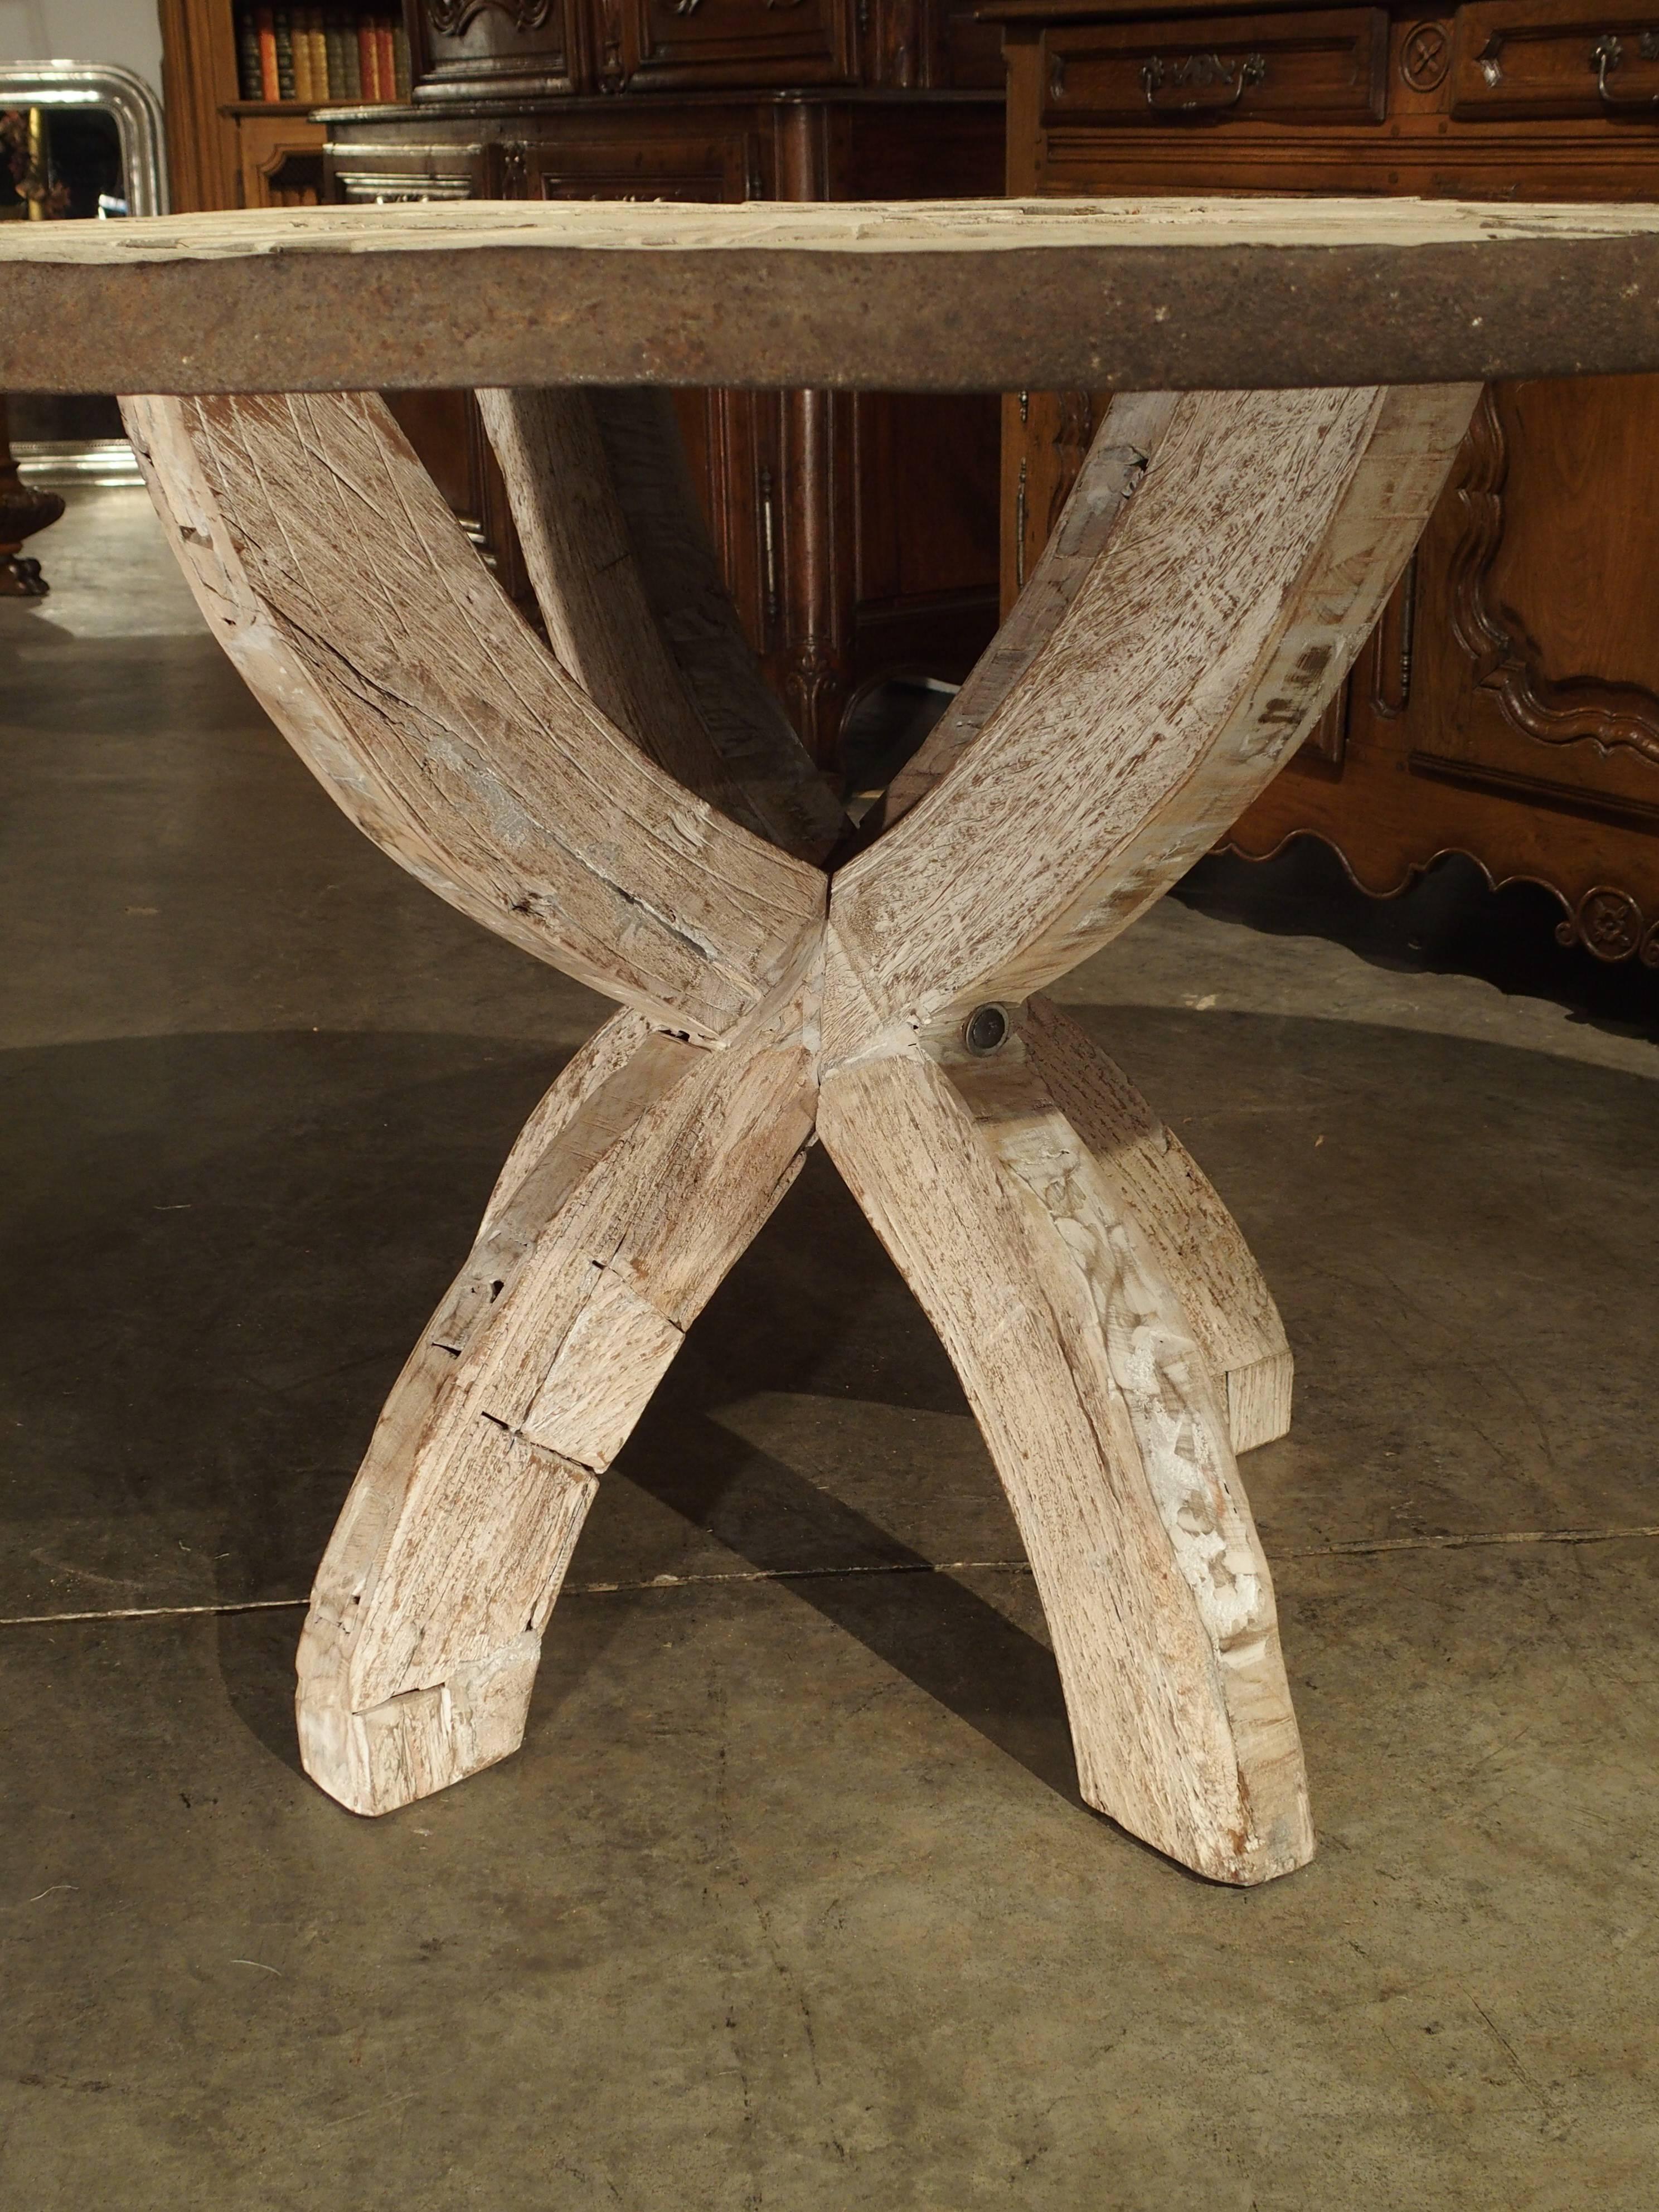 Recent construction, old wood.

This unusual and charming round French table with an iron rimmed top is perfect for a more rustic environment. The wood on the top has been made into three separate circles around a centre round section. The circles